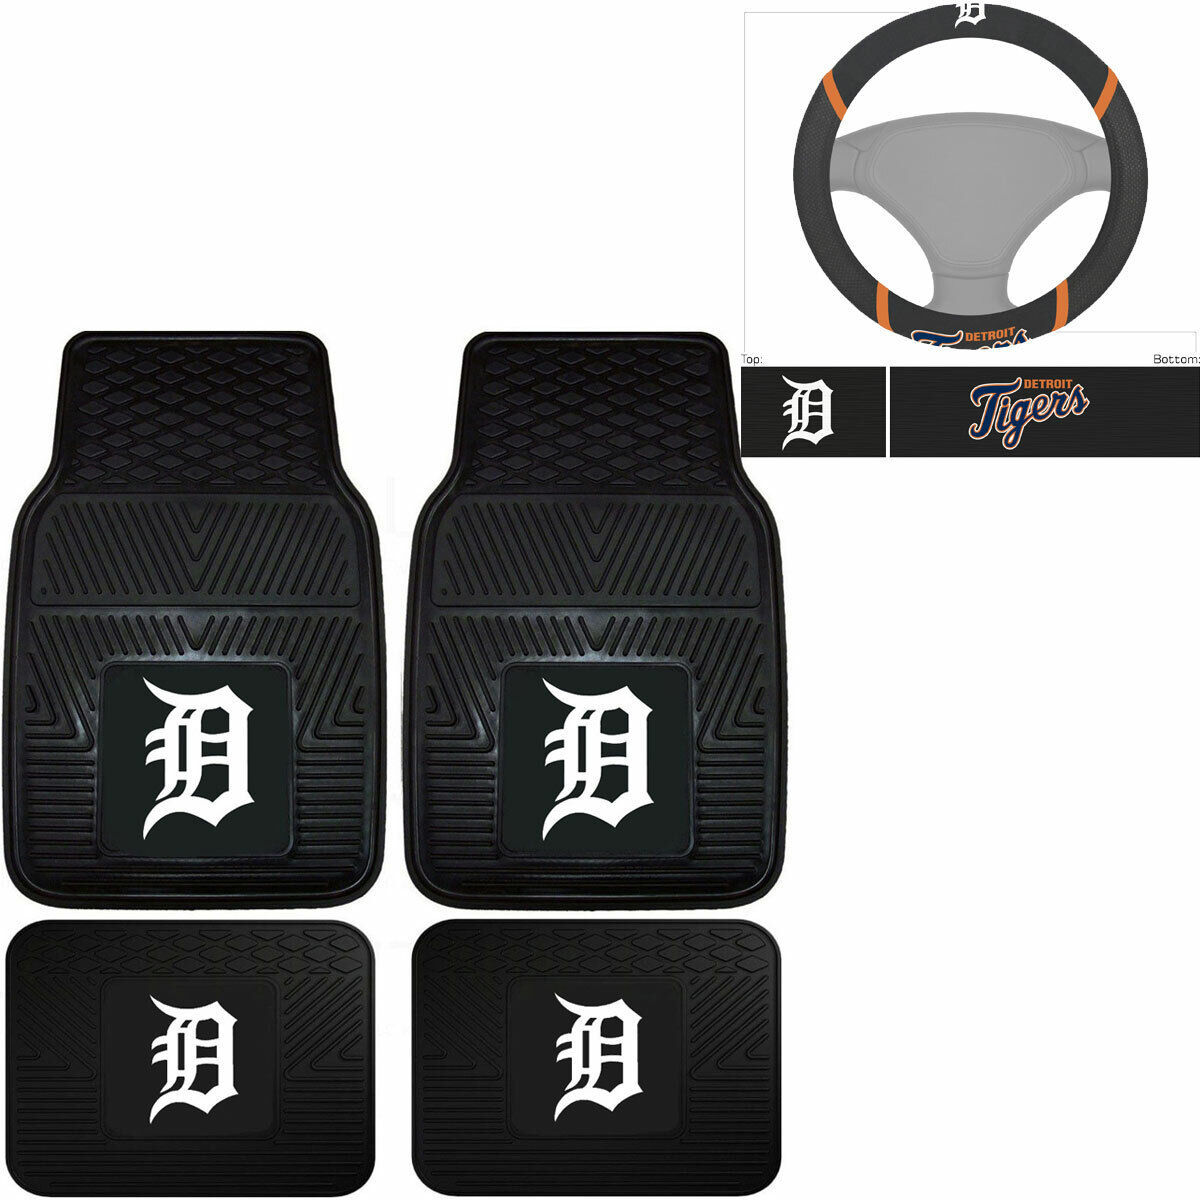 NEW 5PC MLB Detroit Tigers Car Truck Rubber Floor Mats & Steering Wheel Cover